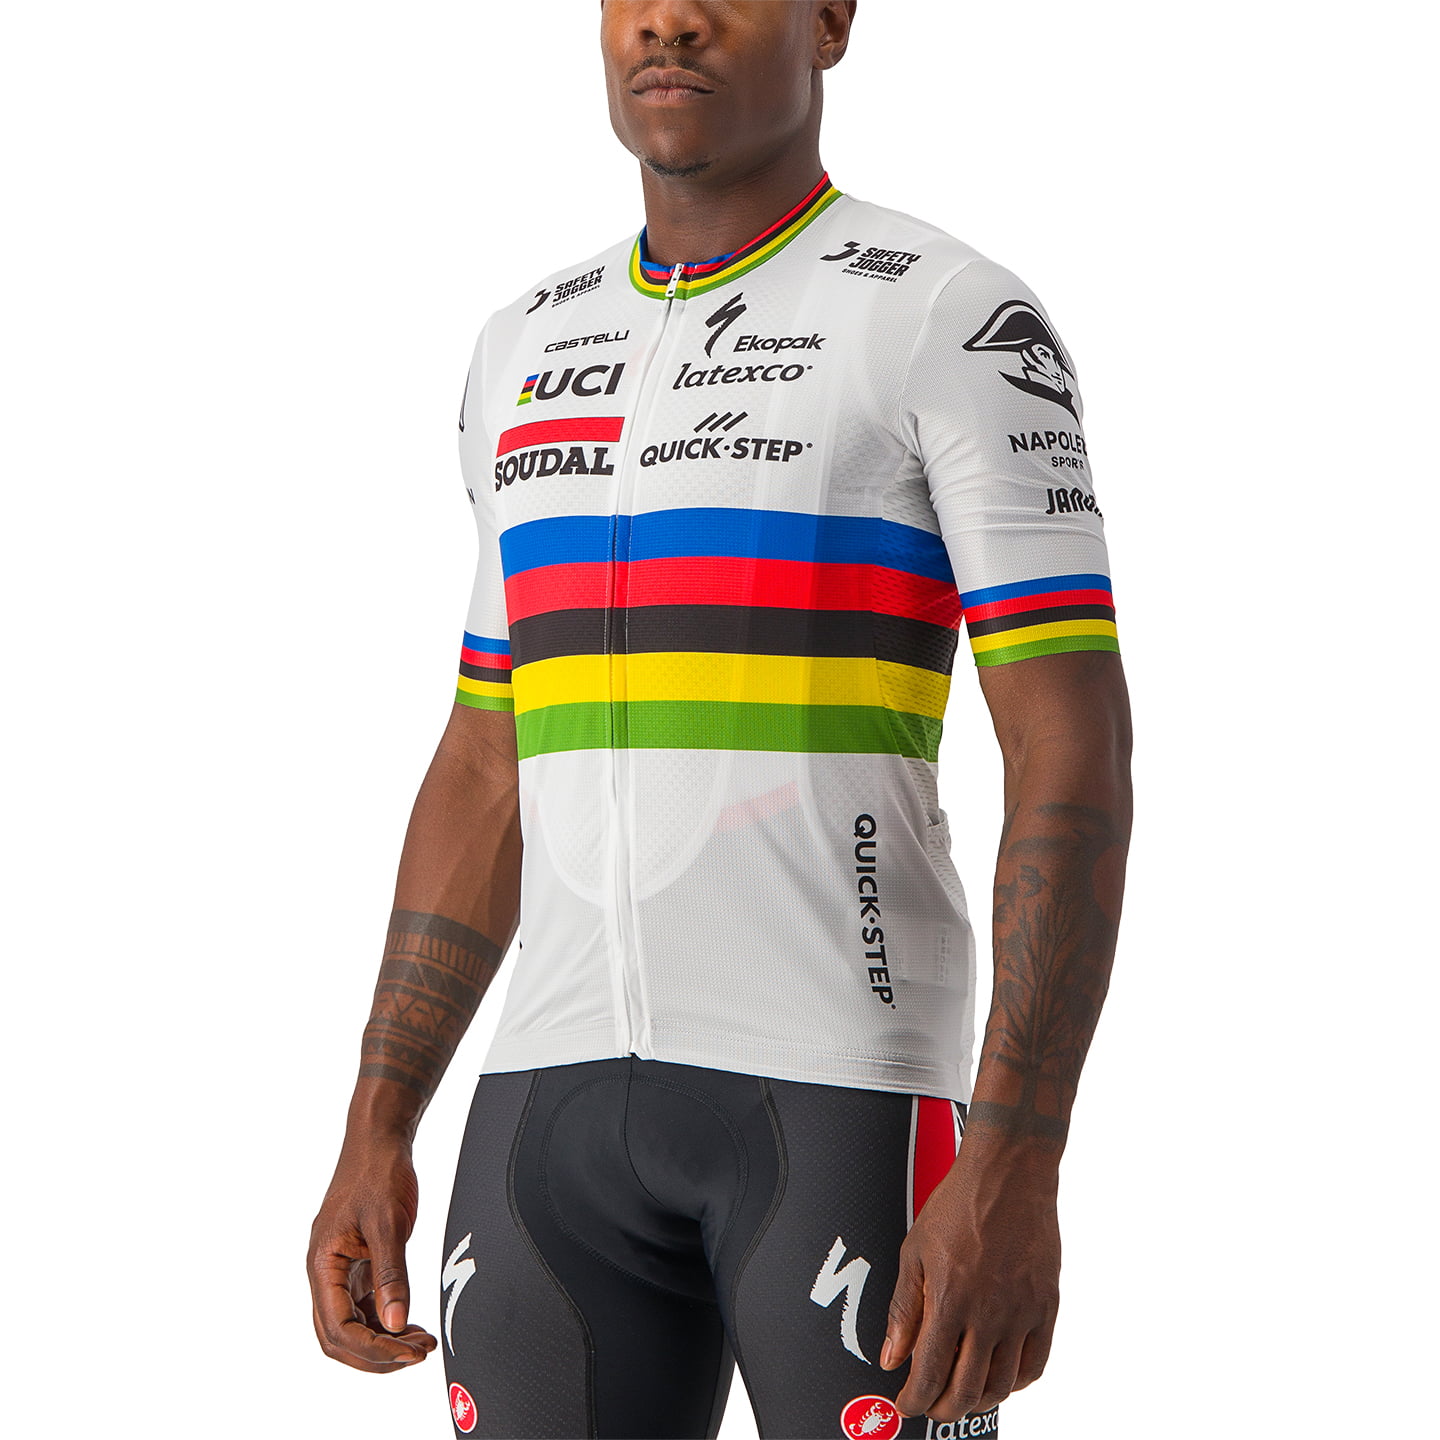 SOUDAL QUICK-STEP World Champion 2023 Short Sleeve Jersey, for men, size 2XL, Cycle shirt, Bike gear